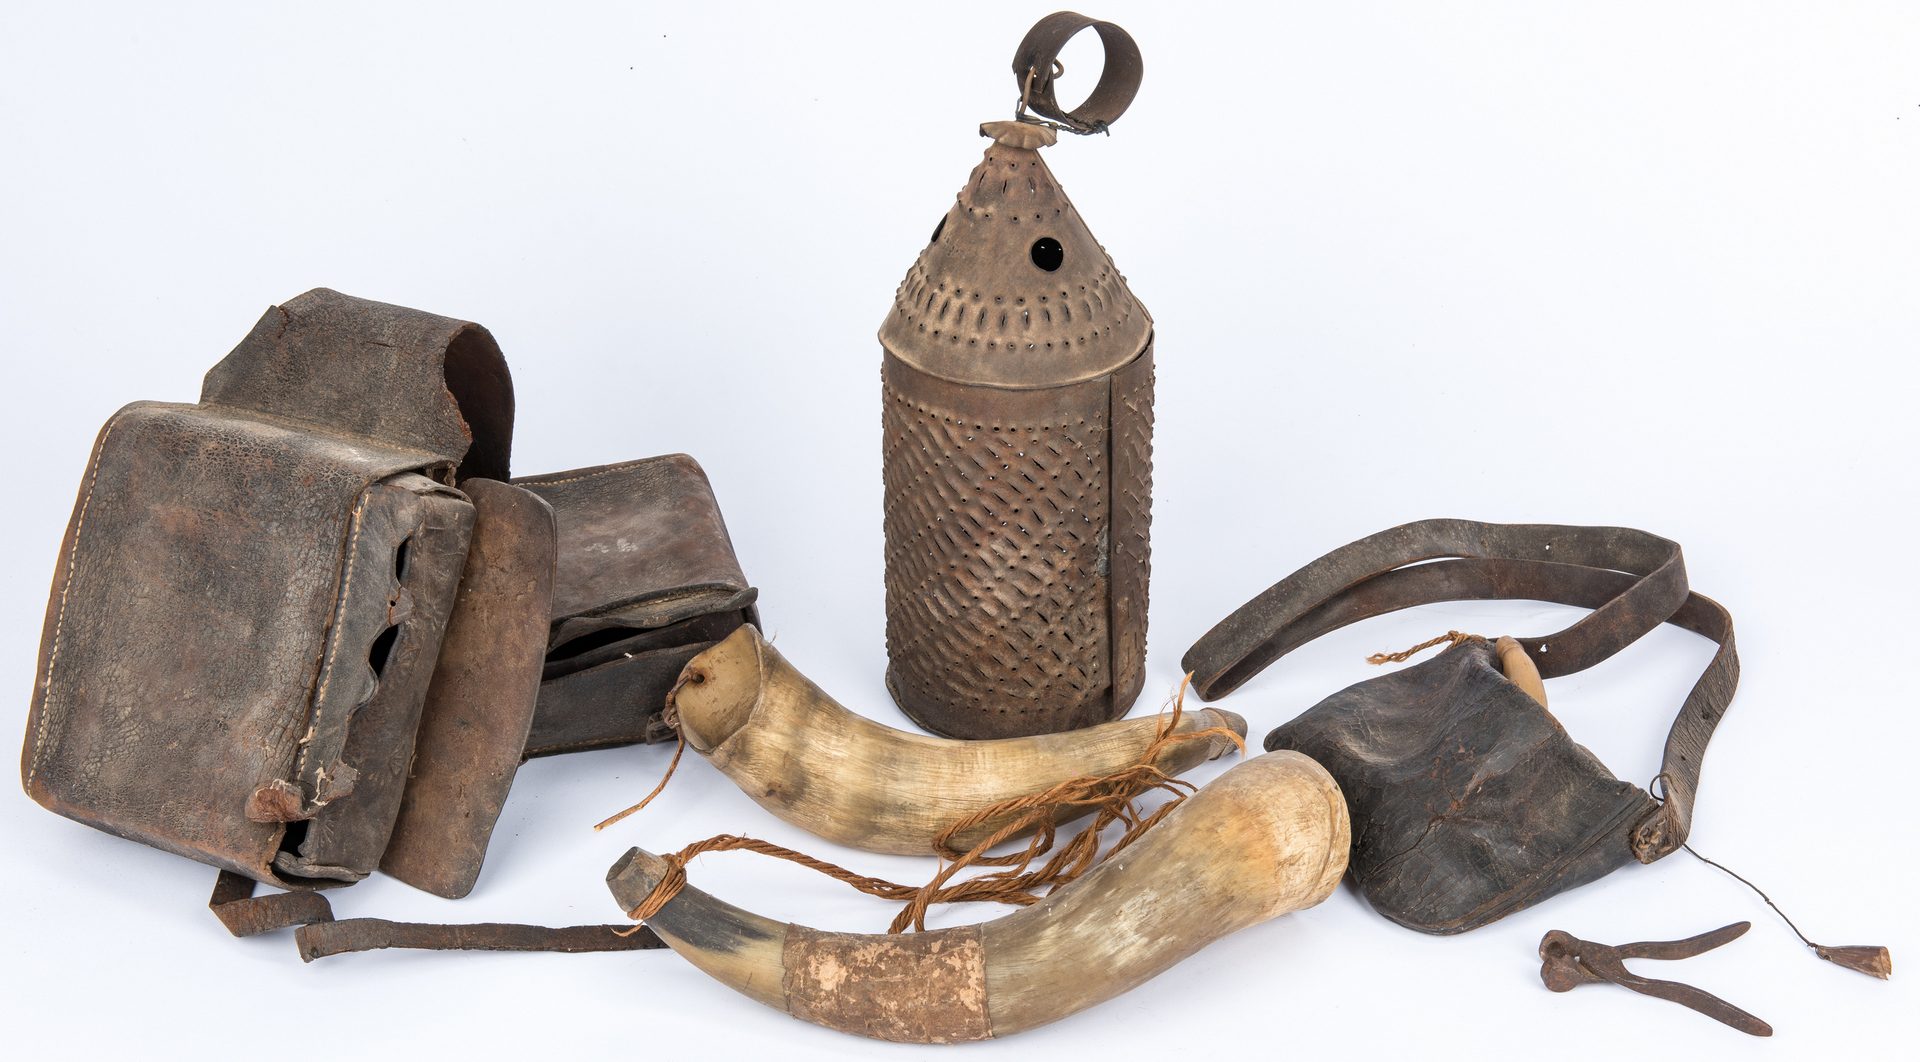 Lot 400: Grouping of Early Frontier Accessories, incl. Punched Lantern, Saddlebags